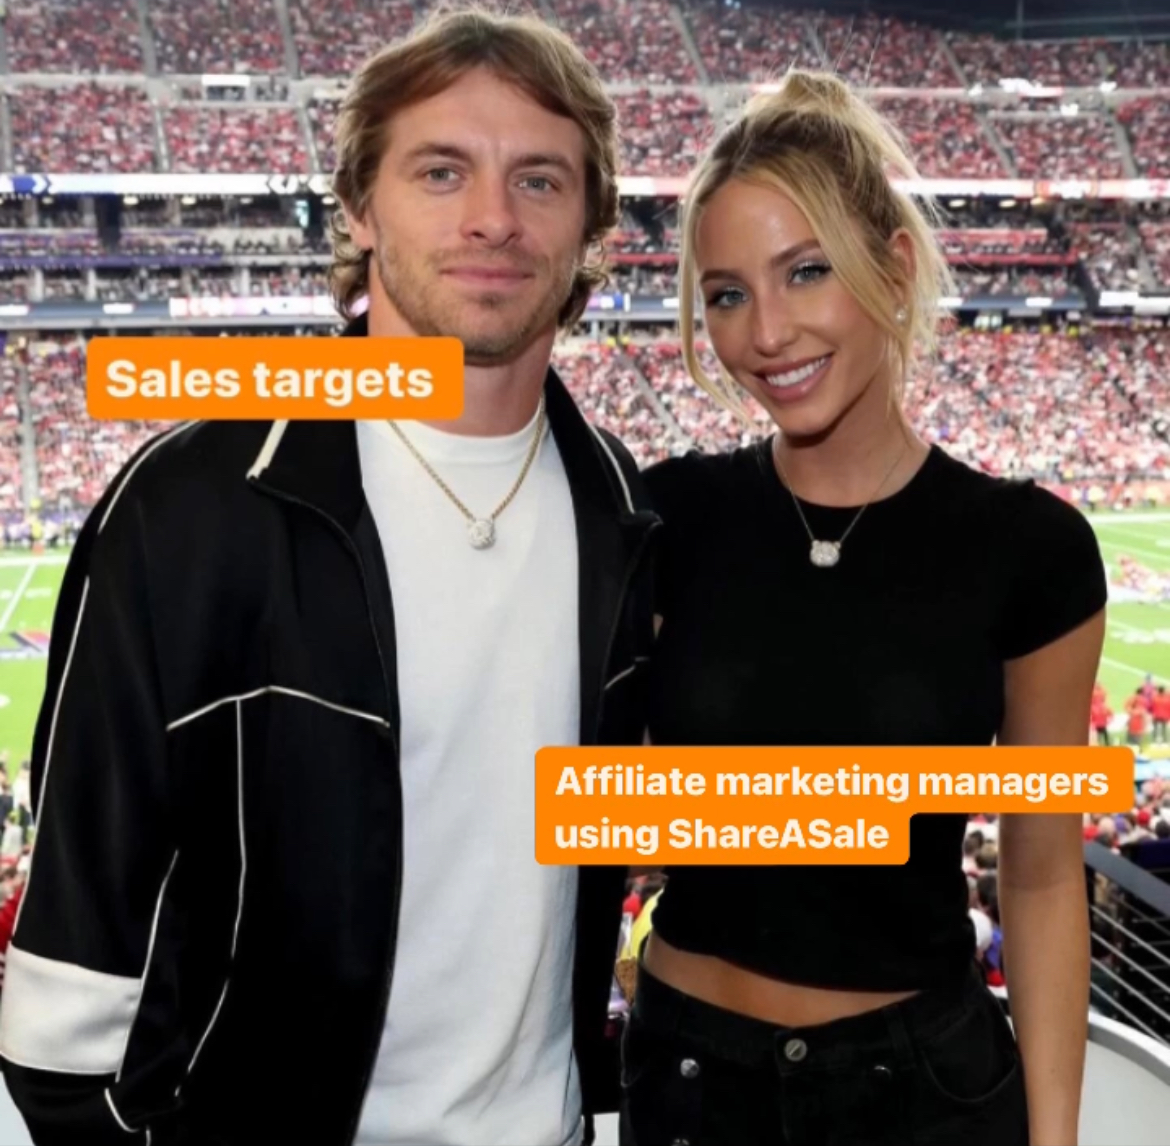 We don’t know about you, but these are definitely our #SuperBowl highlights 👀😂🏈 Which one is your favorite? #AffiliateMarketing #AffiliateMarketingManager